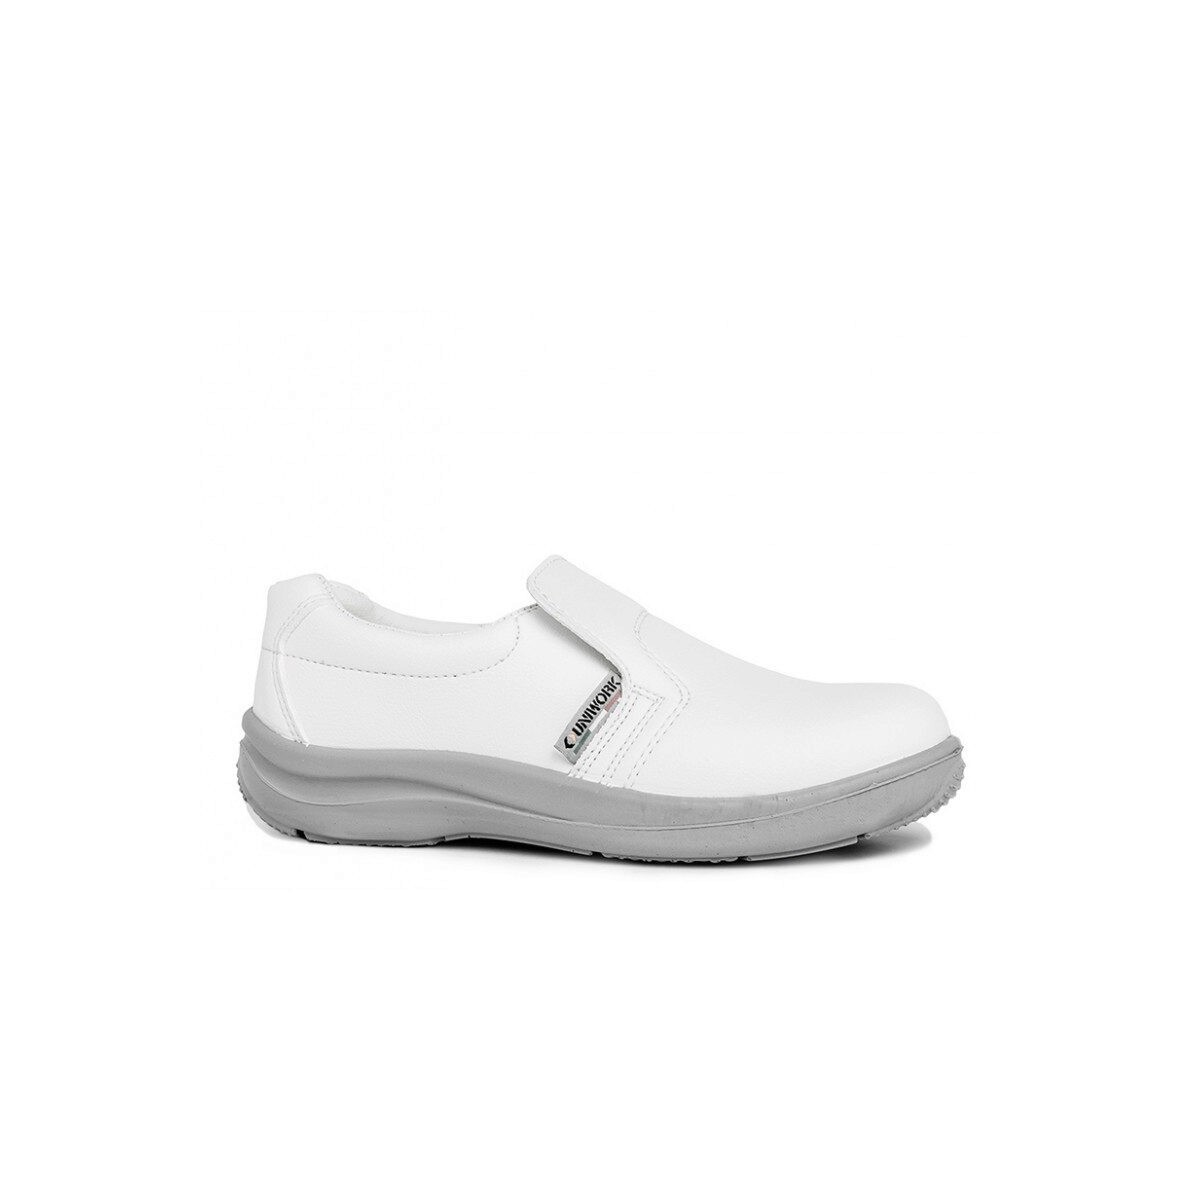 CHAUSSURE SECURIT  MIXTE BLANC TAILLE 44